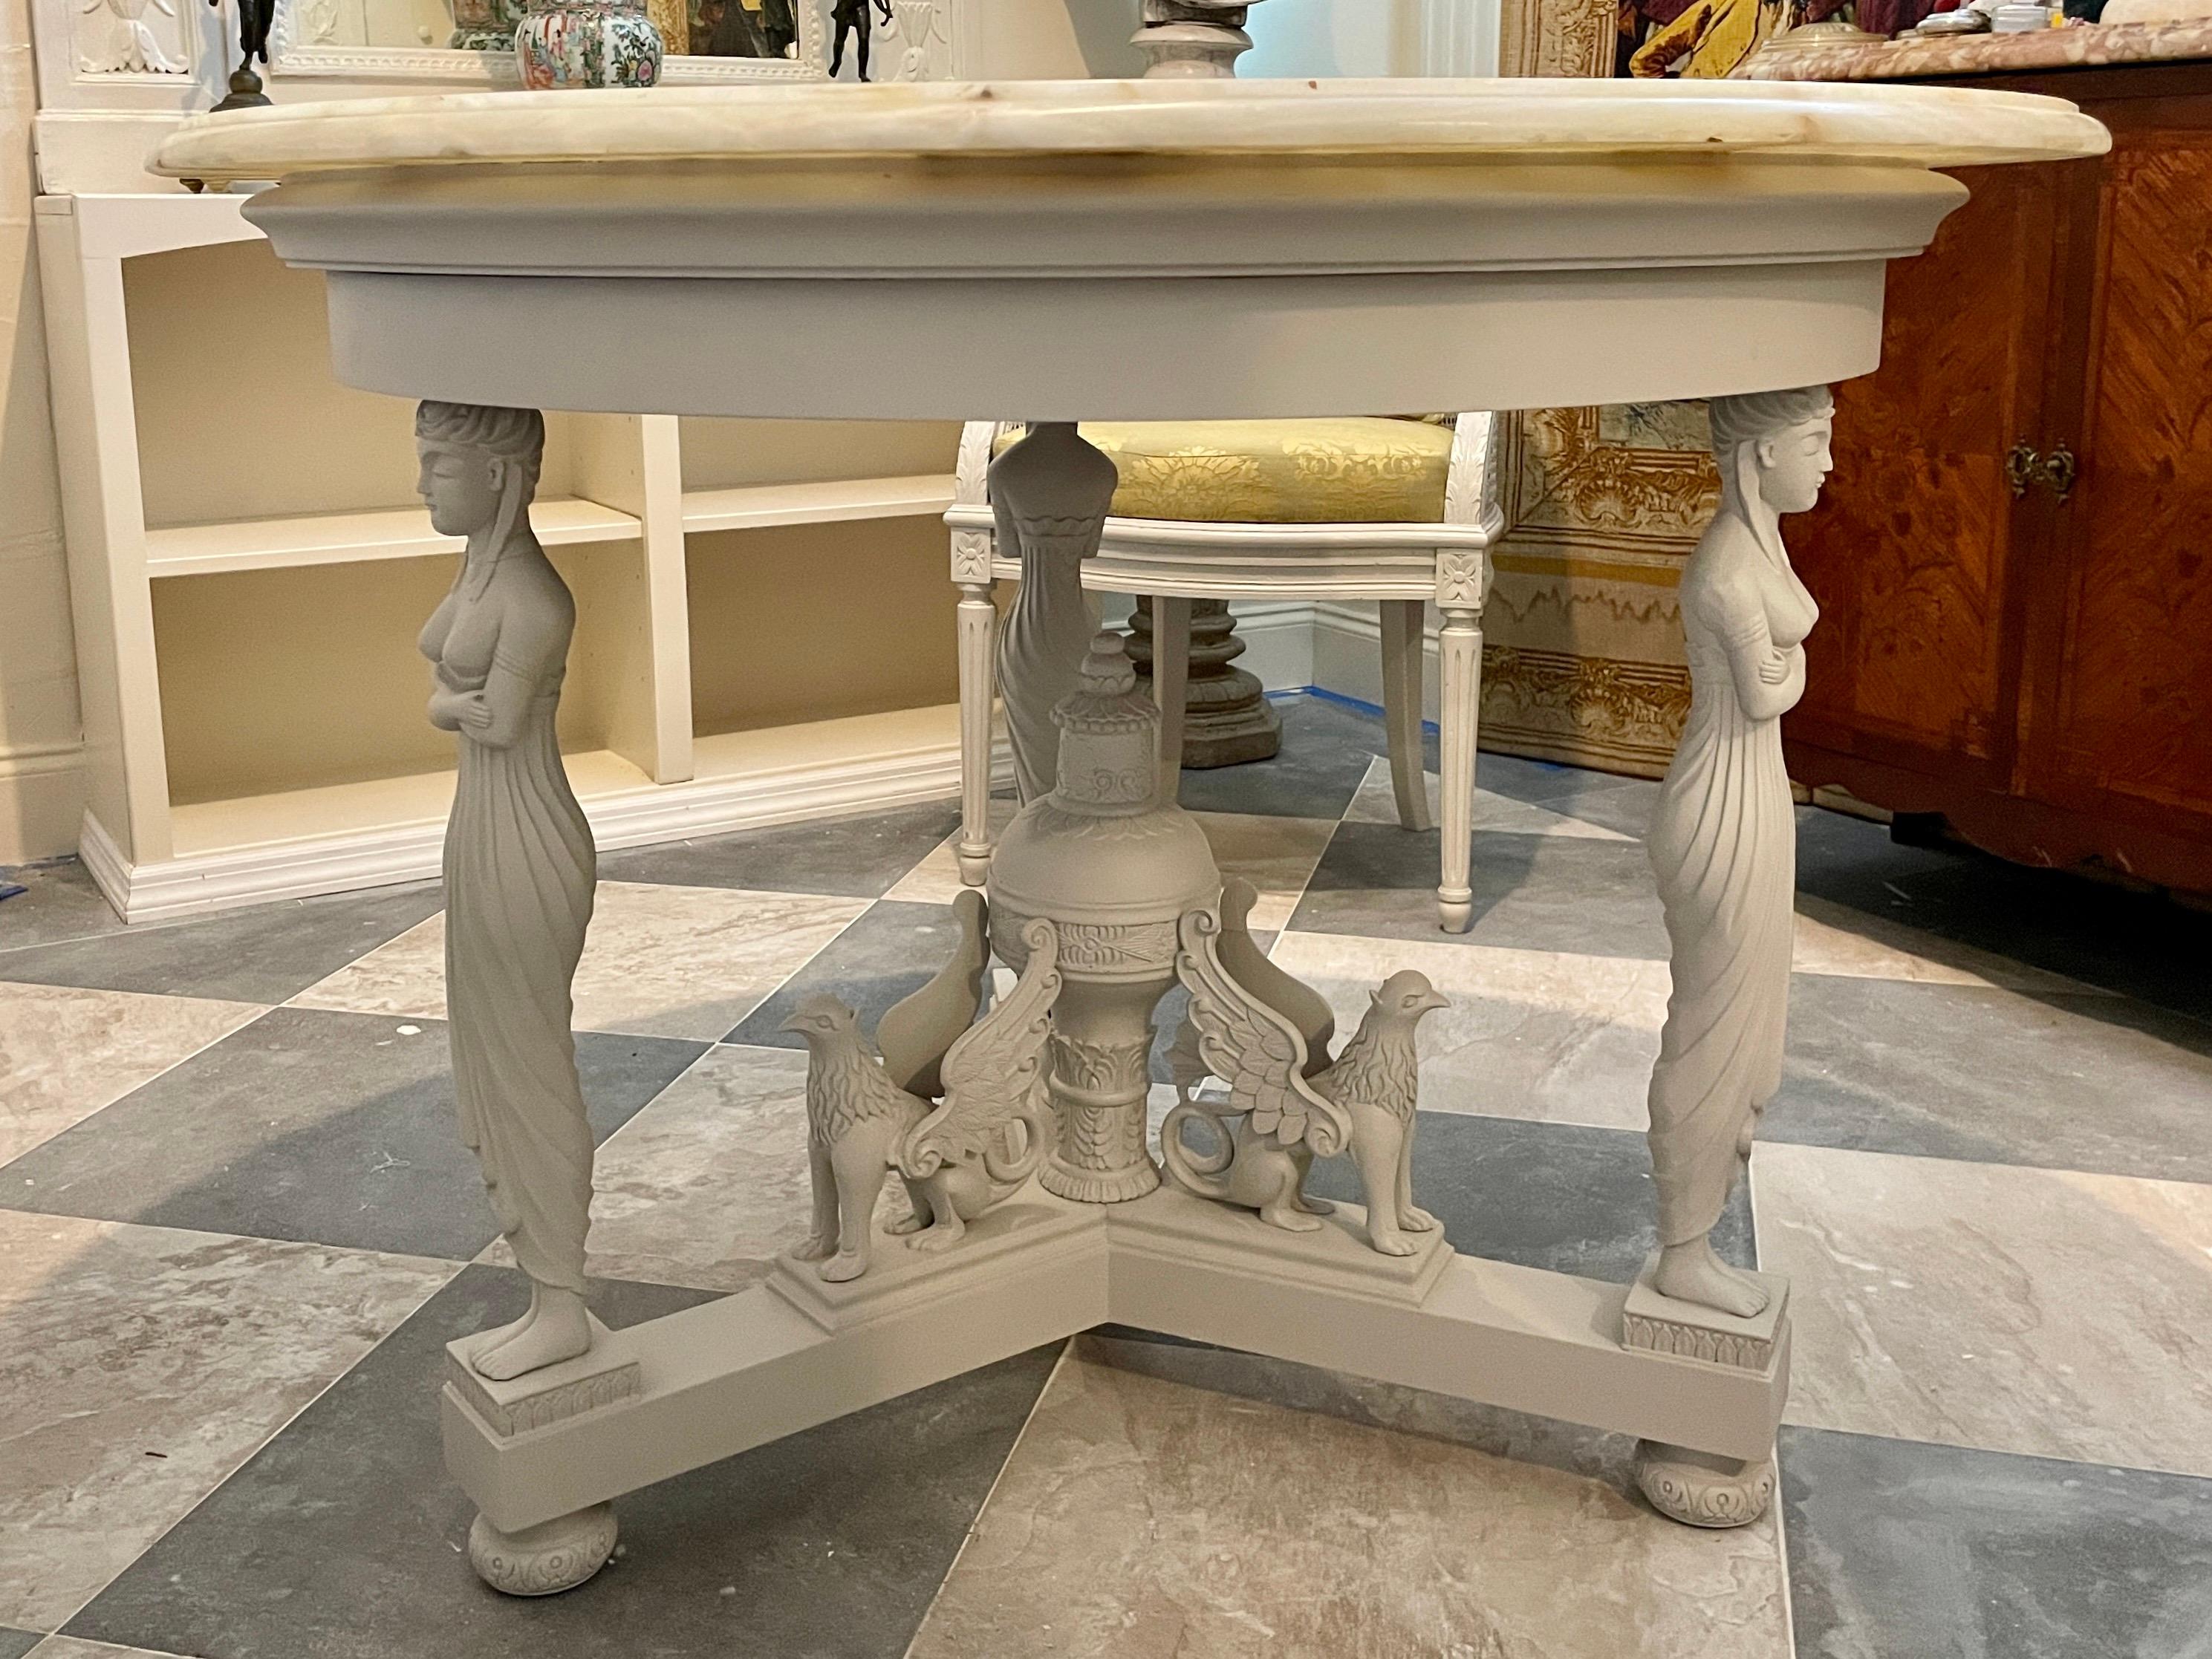 French Empire classical center table in a painted gray finish and gorgeous onyx stone top. Very beautiful color combination and very rare. Add some French Classical Architecture to your home.